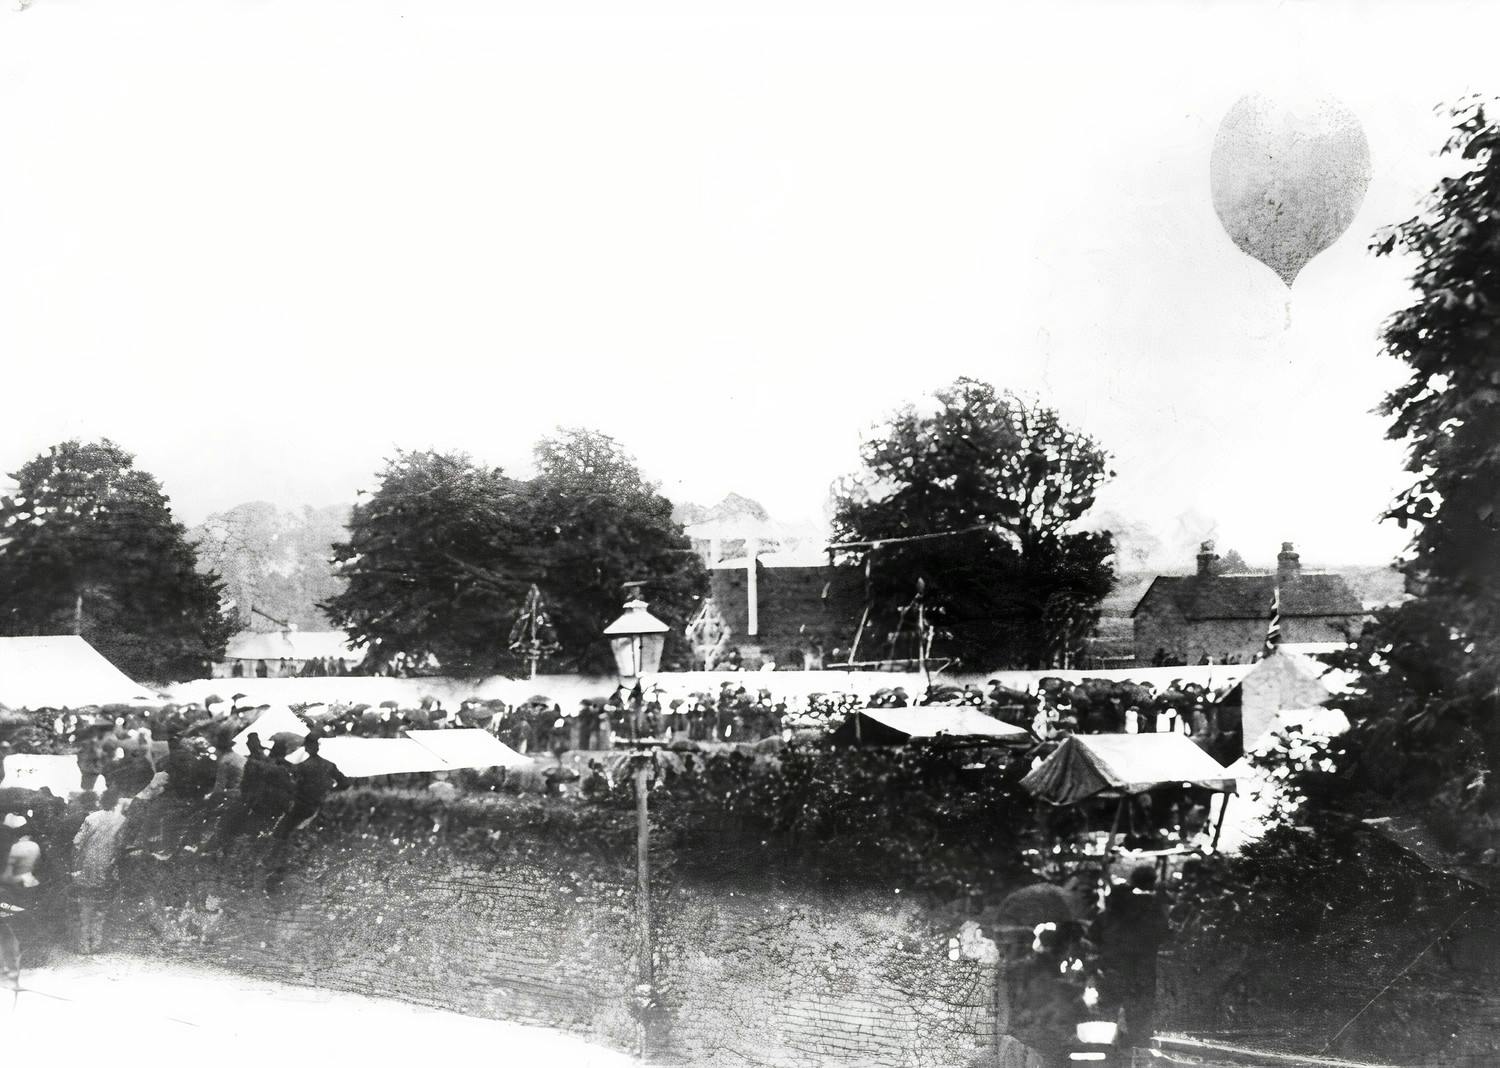 The annual ‘Sudbury Amateur Sports, Bicycle and Boat Races’ taking place on the sports field in Quay Lane and the river beyond. Here the camera has caught one of the special attractions in 1888 – the town Postmaster, Mr Hills, making a balloon ascent from the field. The balloon was filled with gas provide by the gas works just across the Lane; the balloon later landed safely at Newton Green.